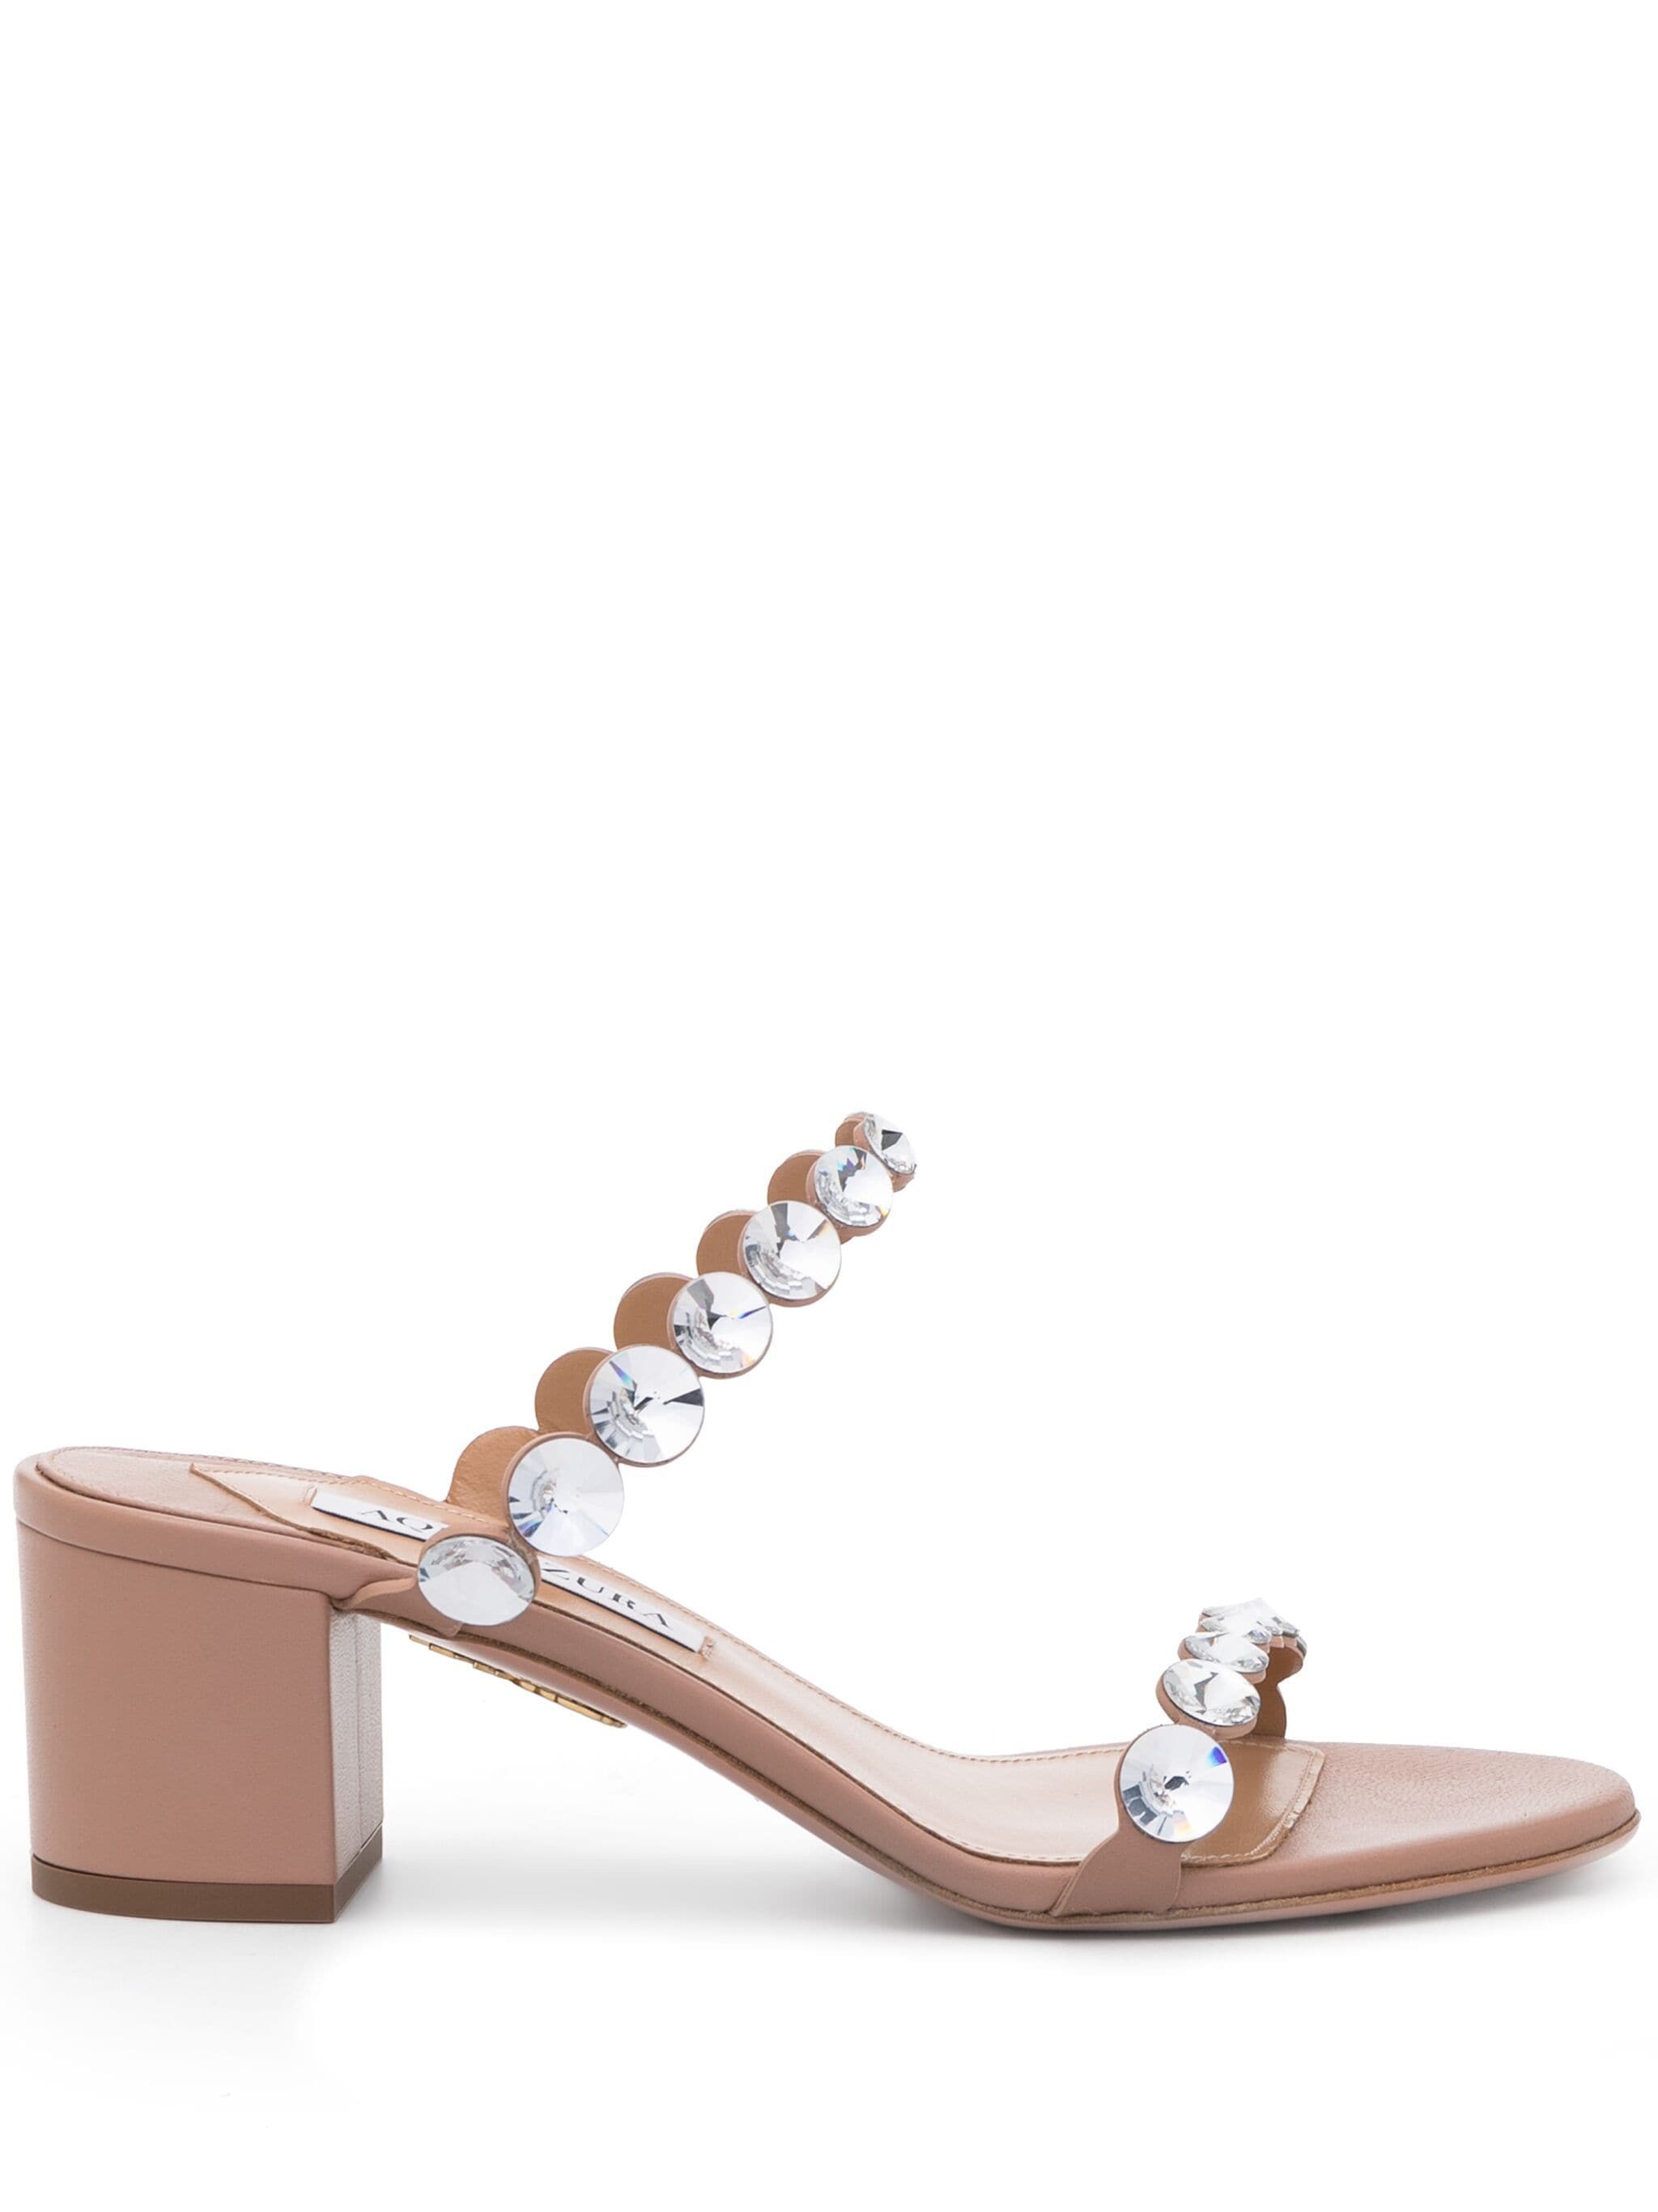 Maxi-Tequila sandals 50mm